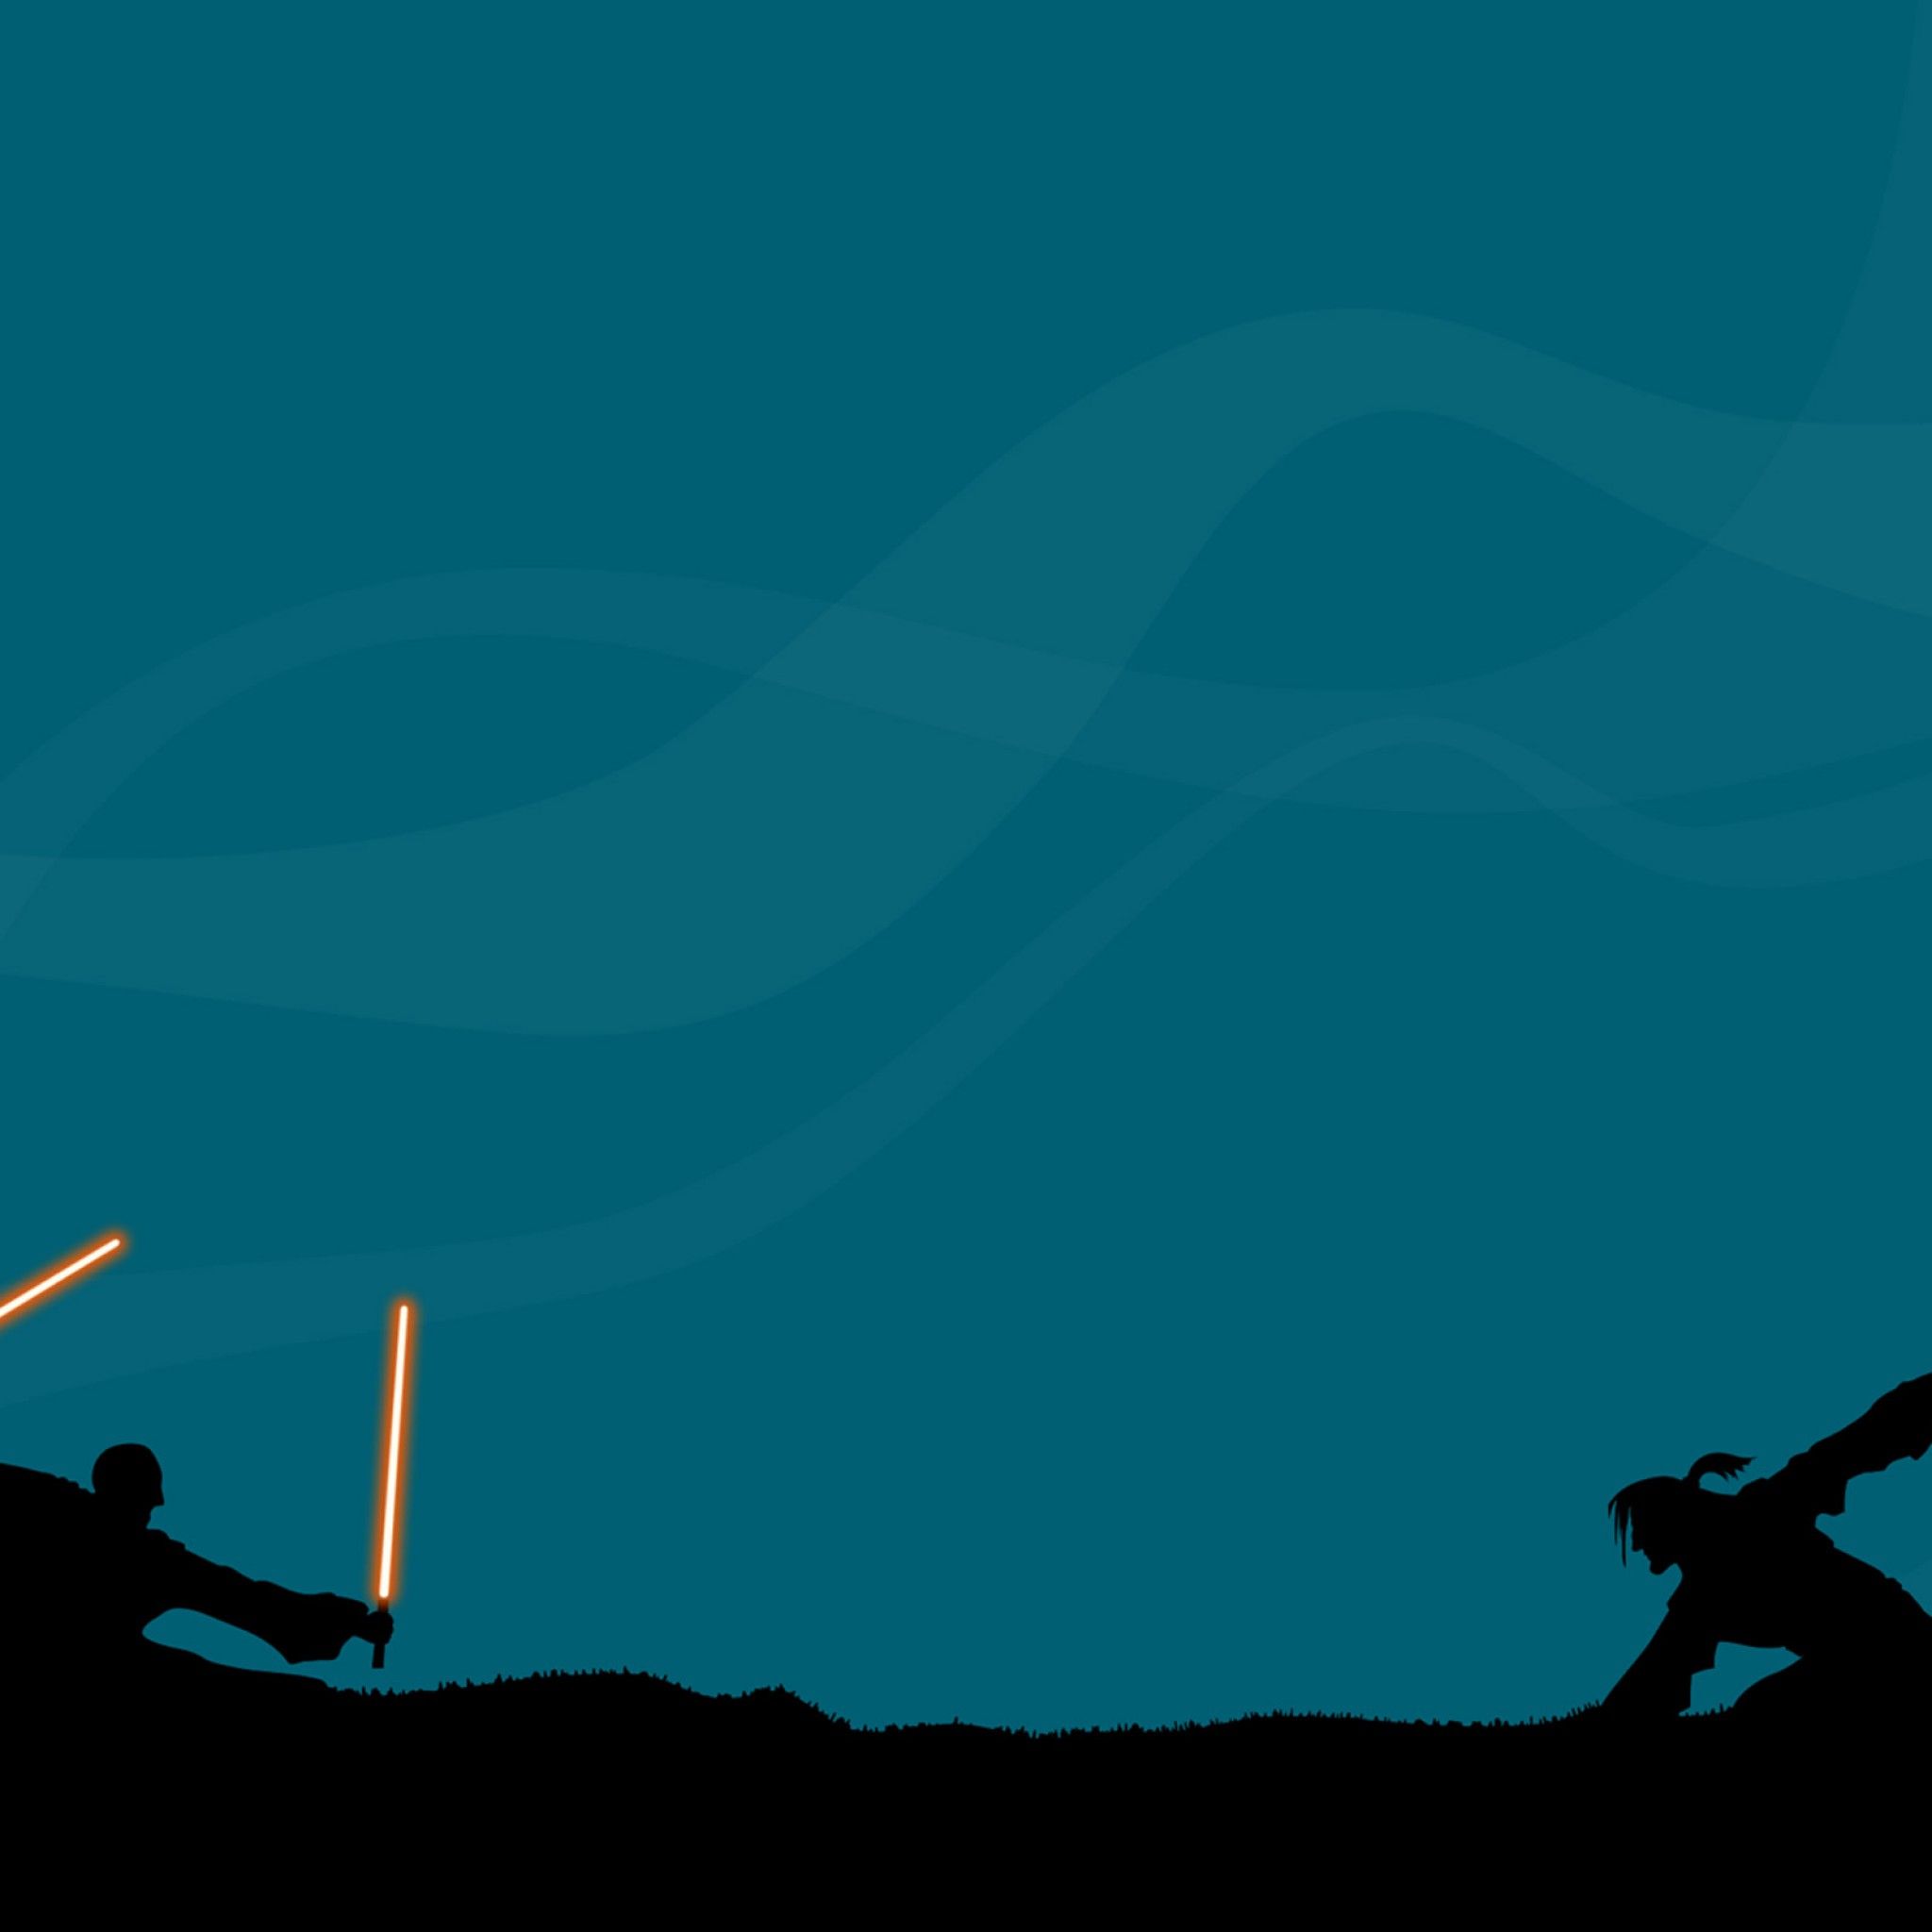 A minimalist wallpaper of Luke and Vader dueling with their sabers. - Star Wars